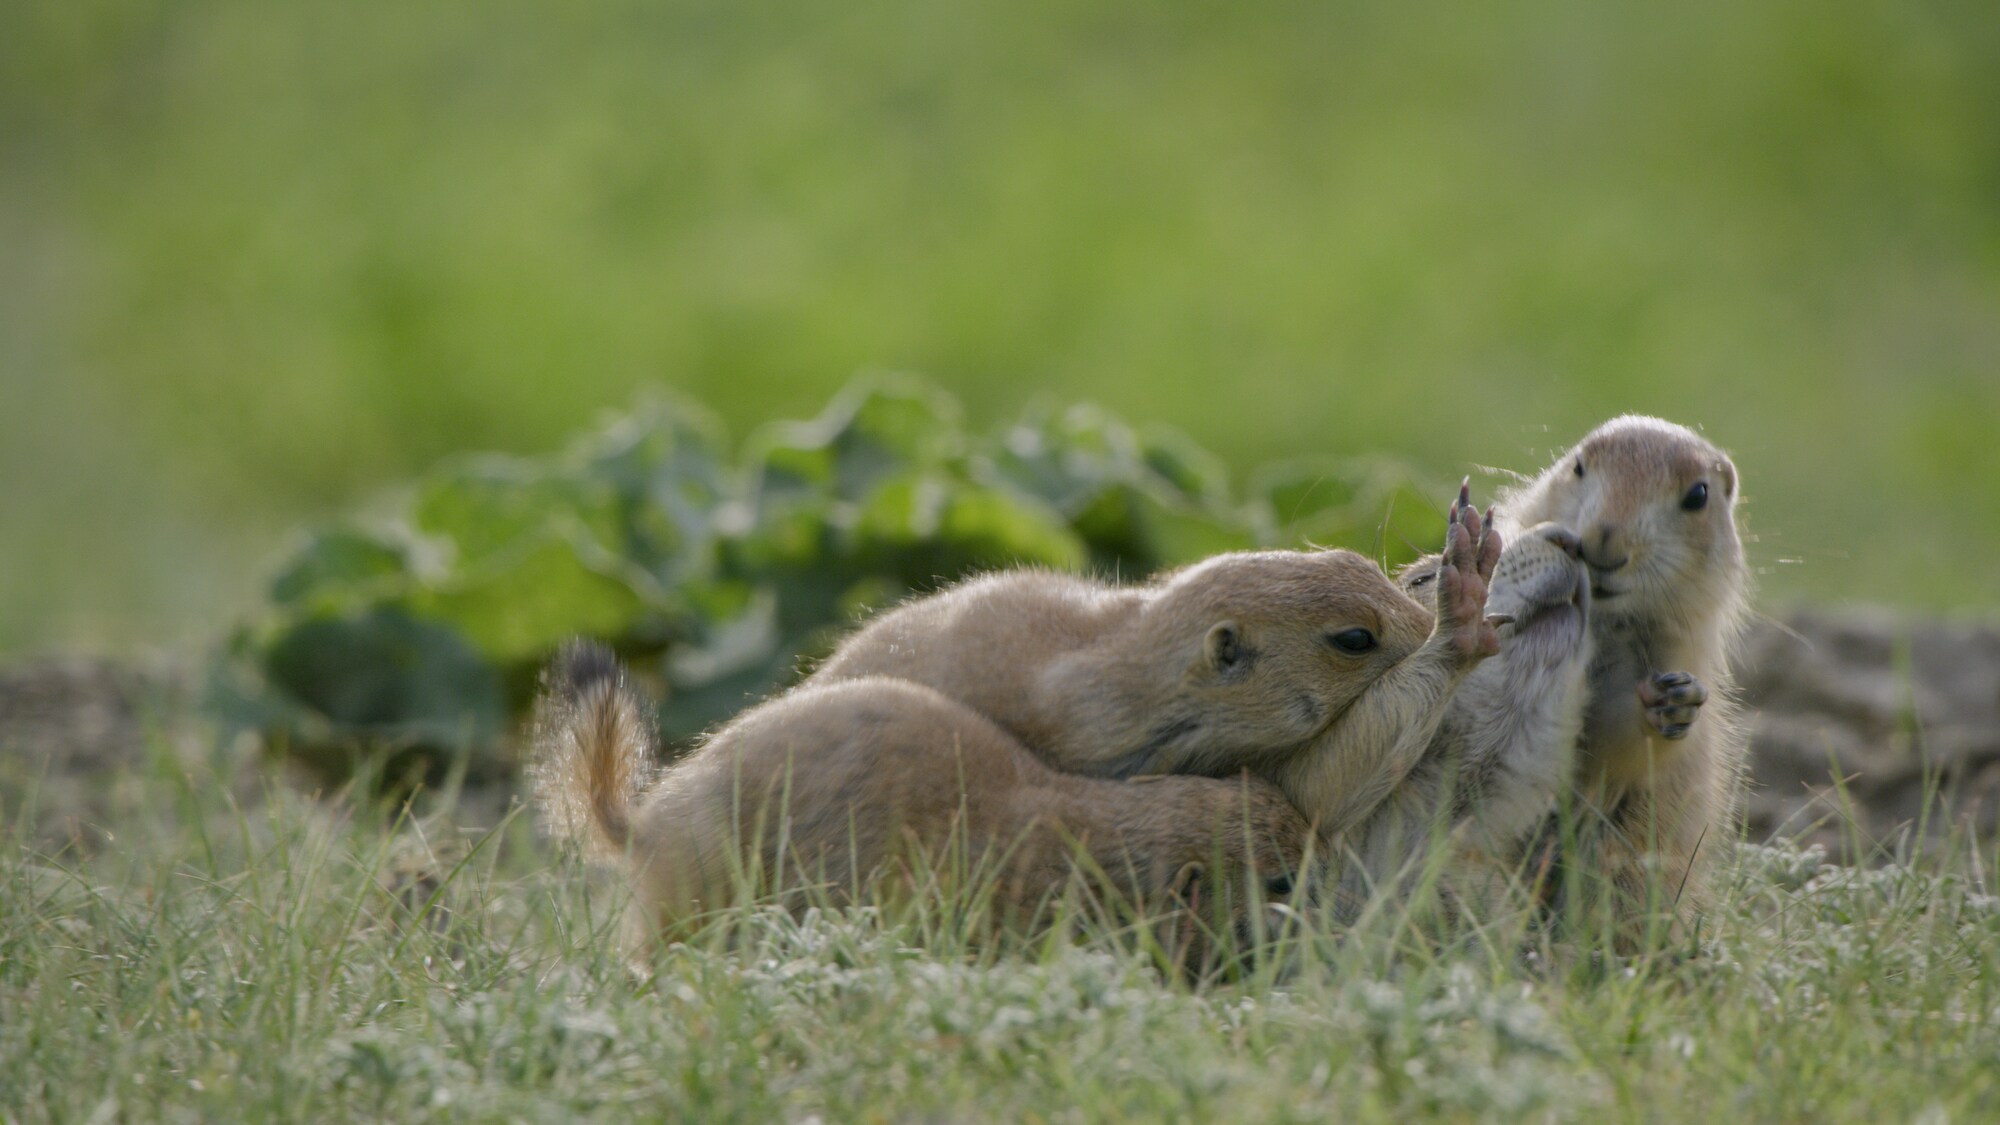 While harassed by her offspring, a Black-tailed Prairie Dog mom takes a stretch. (National Geographic for Disney+/Dawson Dunning)